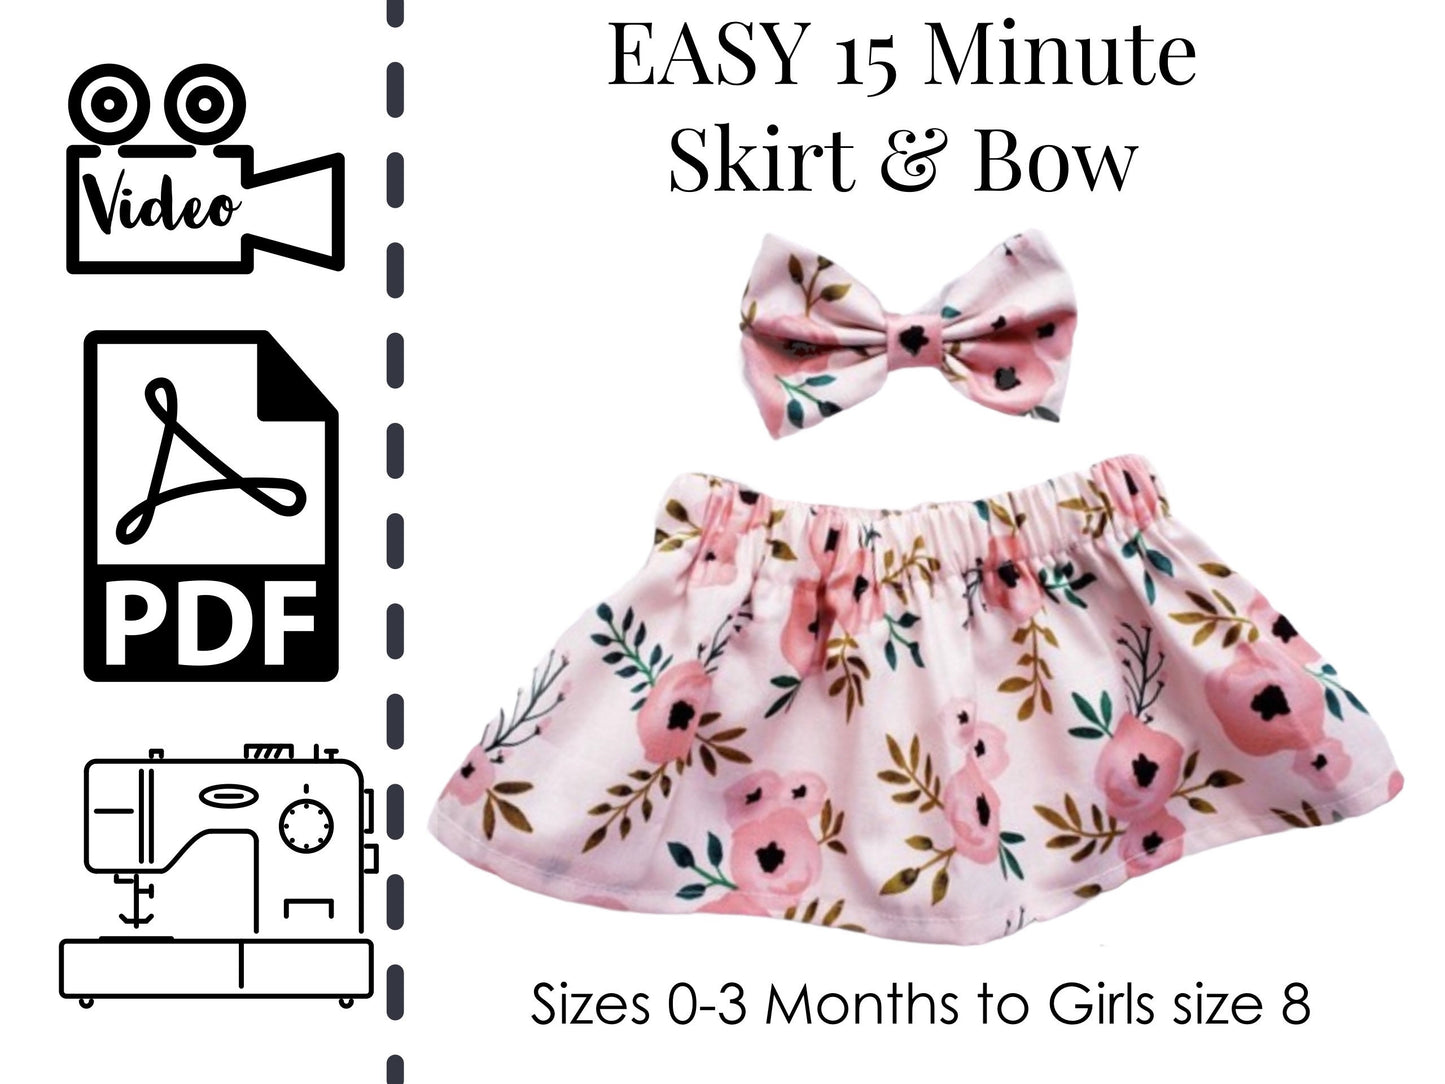 easy baby skirt sewing pattern, pdf sewing pattern, learn how to sew baby clothes, childrens skirt, toddler skirt, girls skirt, fabric hair bow, hair bow sewing pattern, boutique hair bow